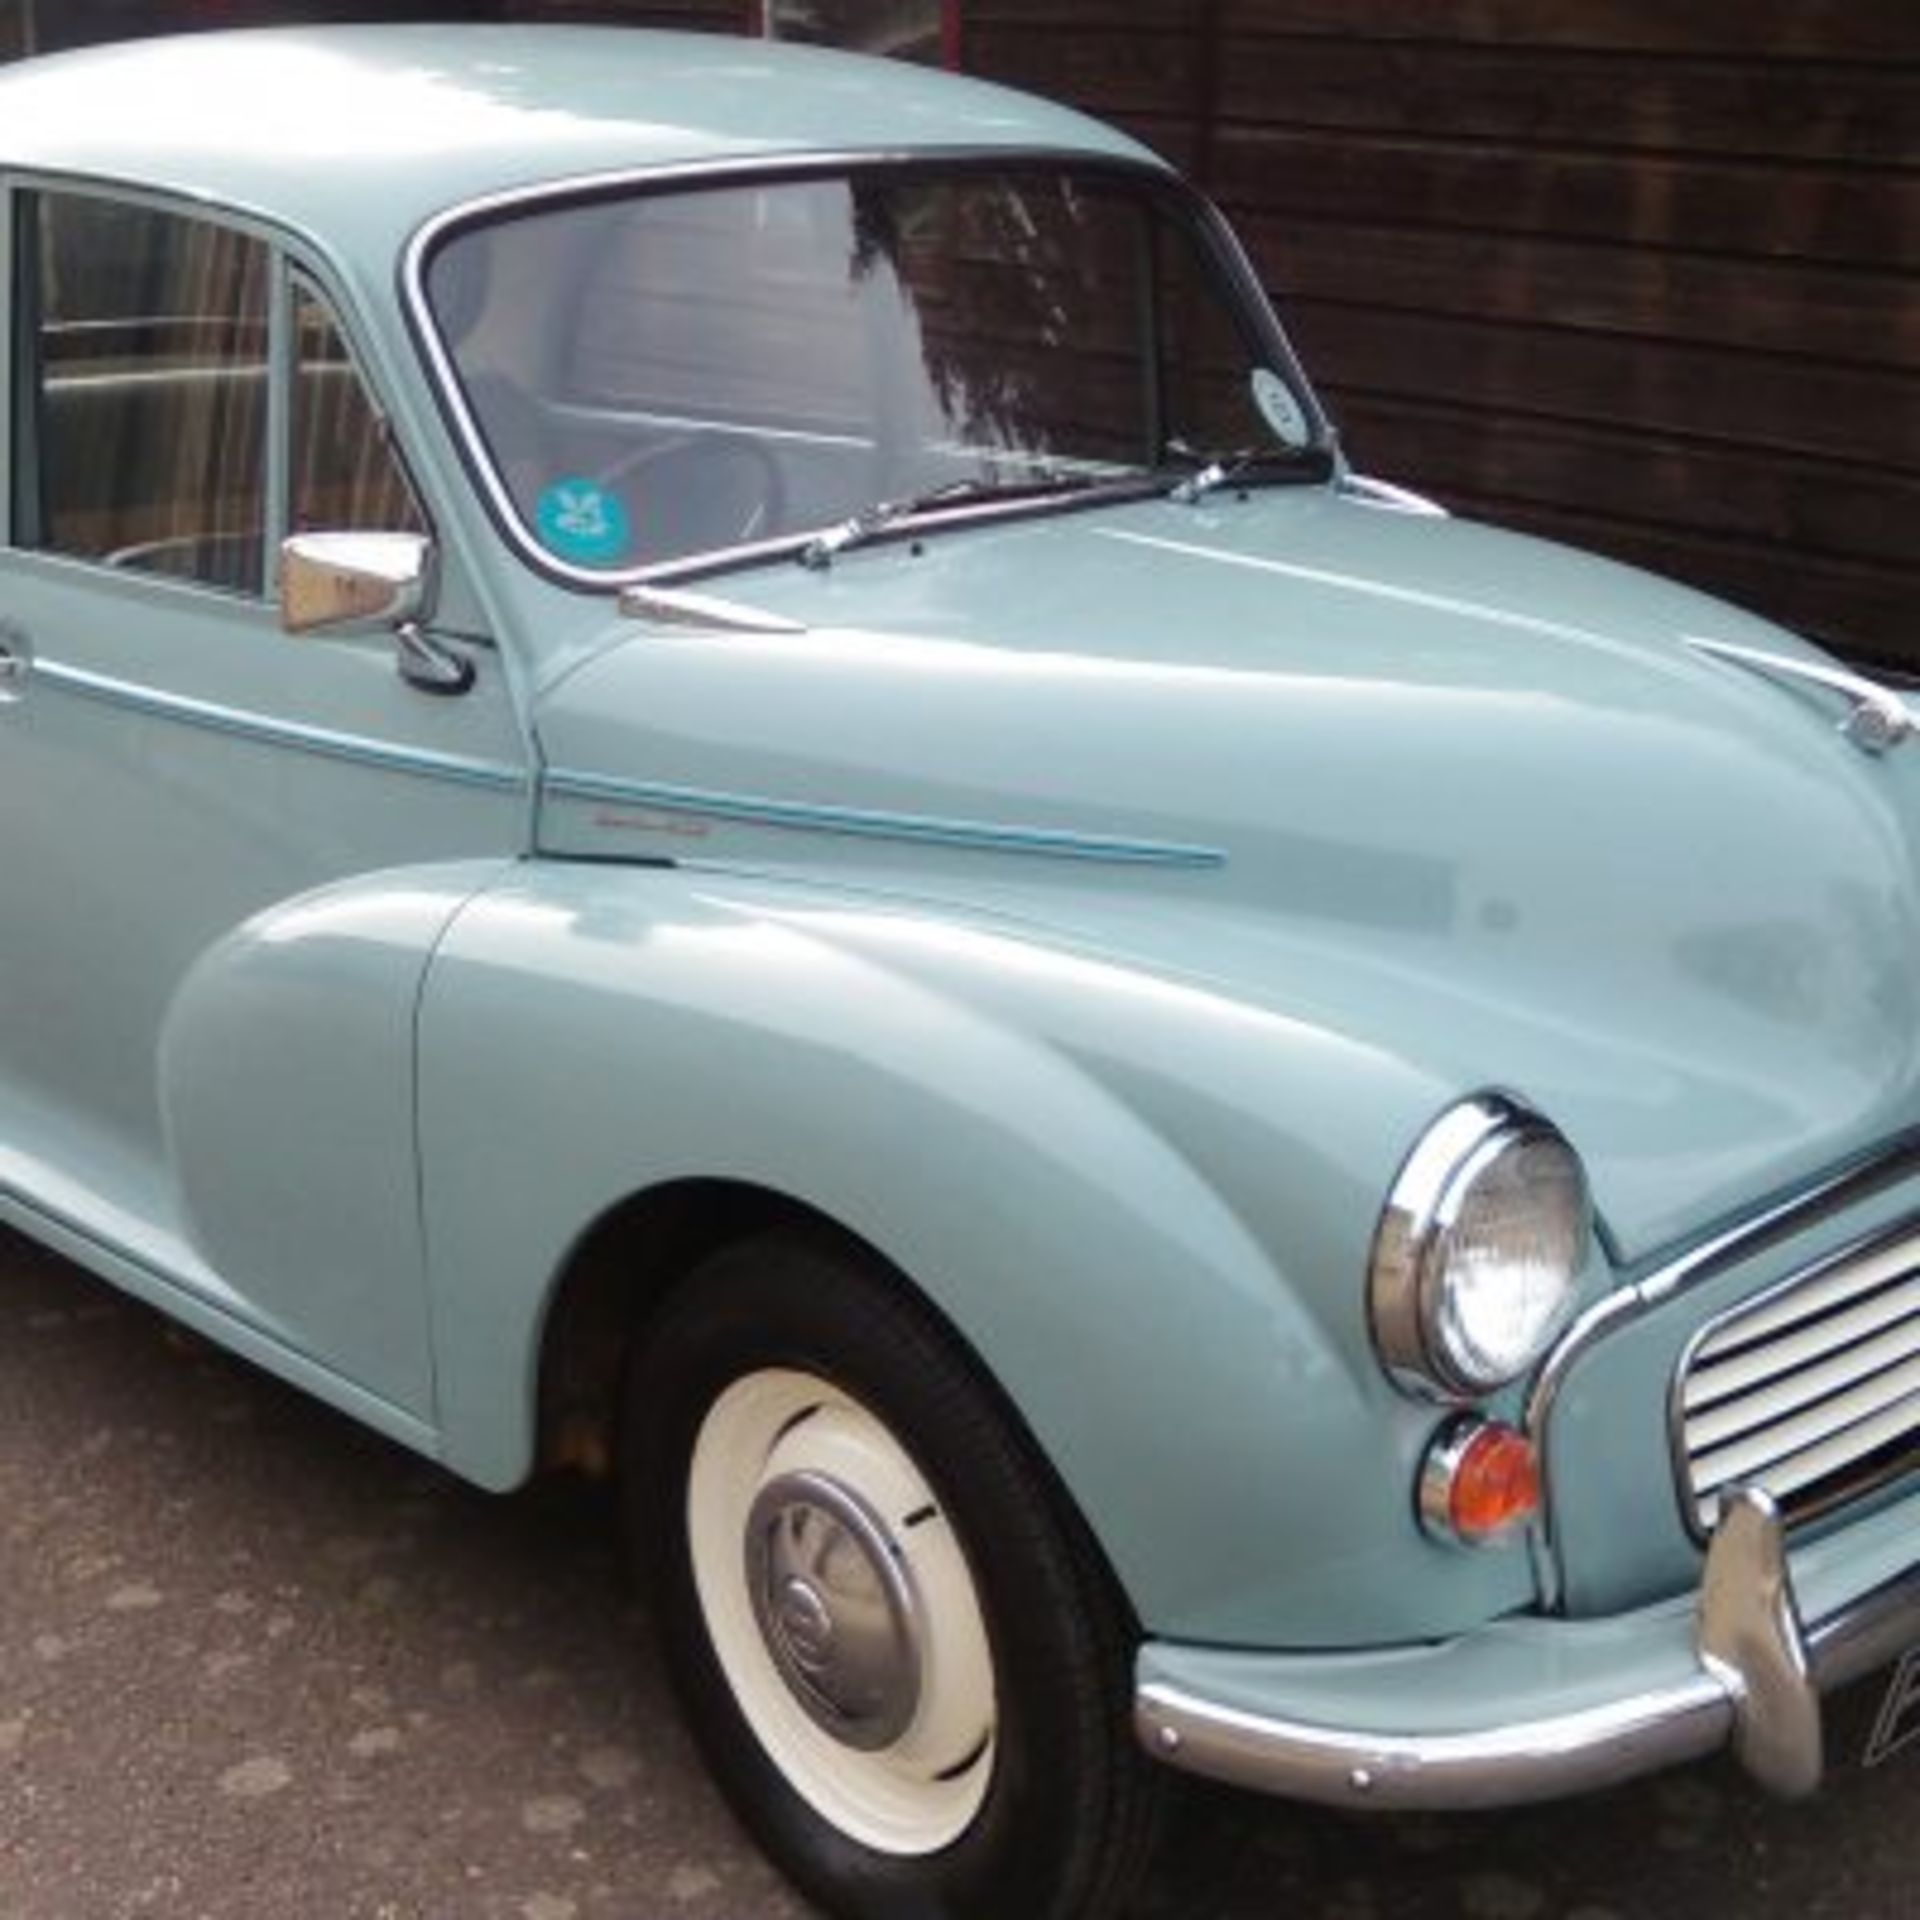 Morris Minor “Low mileage” 1964 - This lovely low mileage 1964 “Moggy Minor” has been owned by the - Image 2 of 14